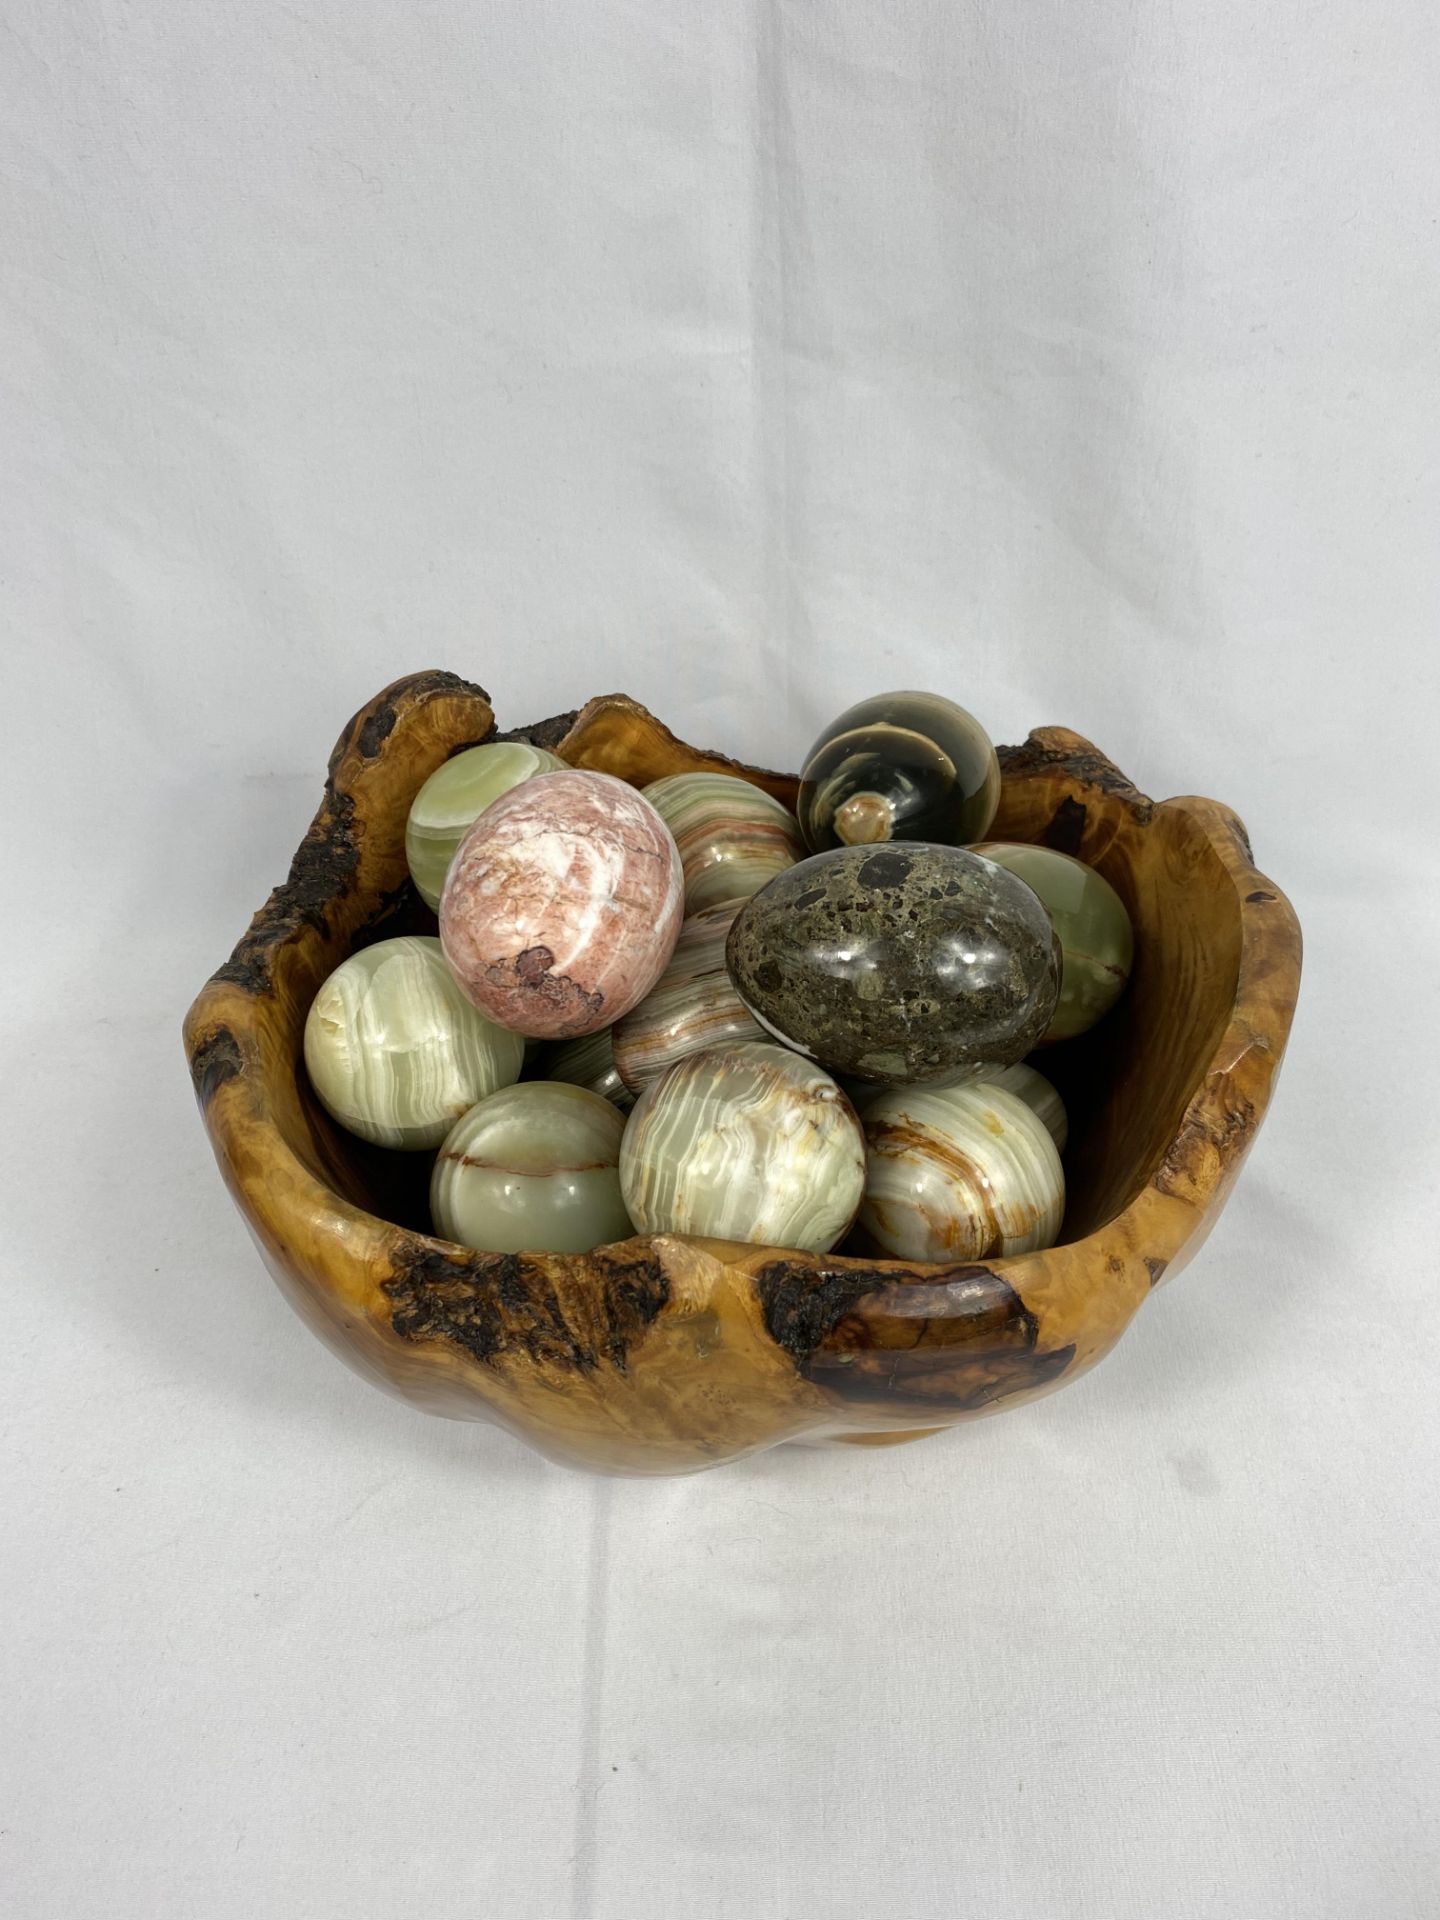 A wood bowl containing a quantity of wood and stone eggs